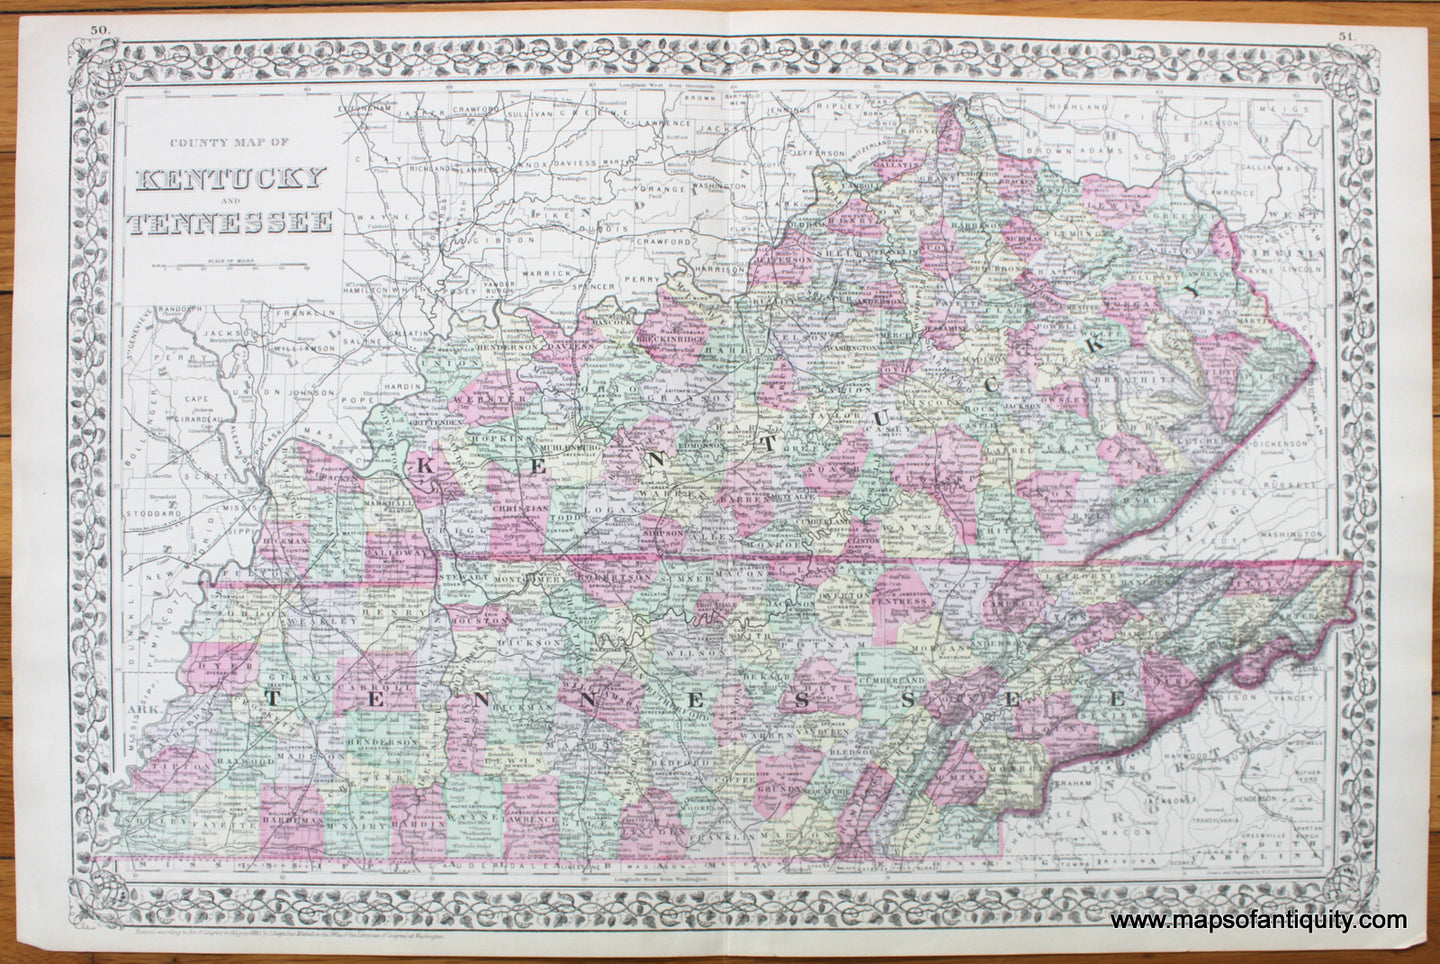 Antique-Hand-Colored-Map-County-Map-of-Kentucky-and-Tennessee-United-States-Mid-west-1884-Mitchell-Maps-Of-Antiquity